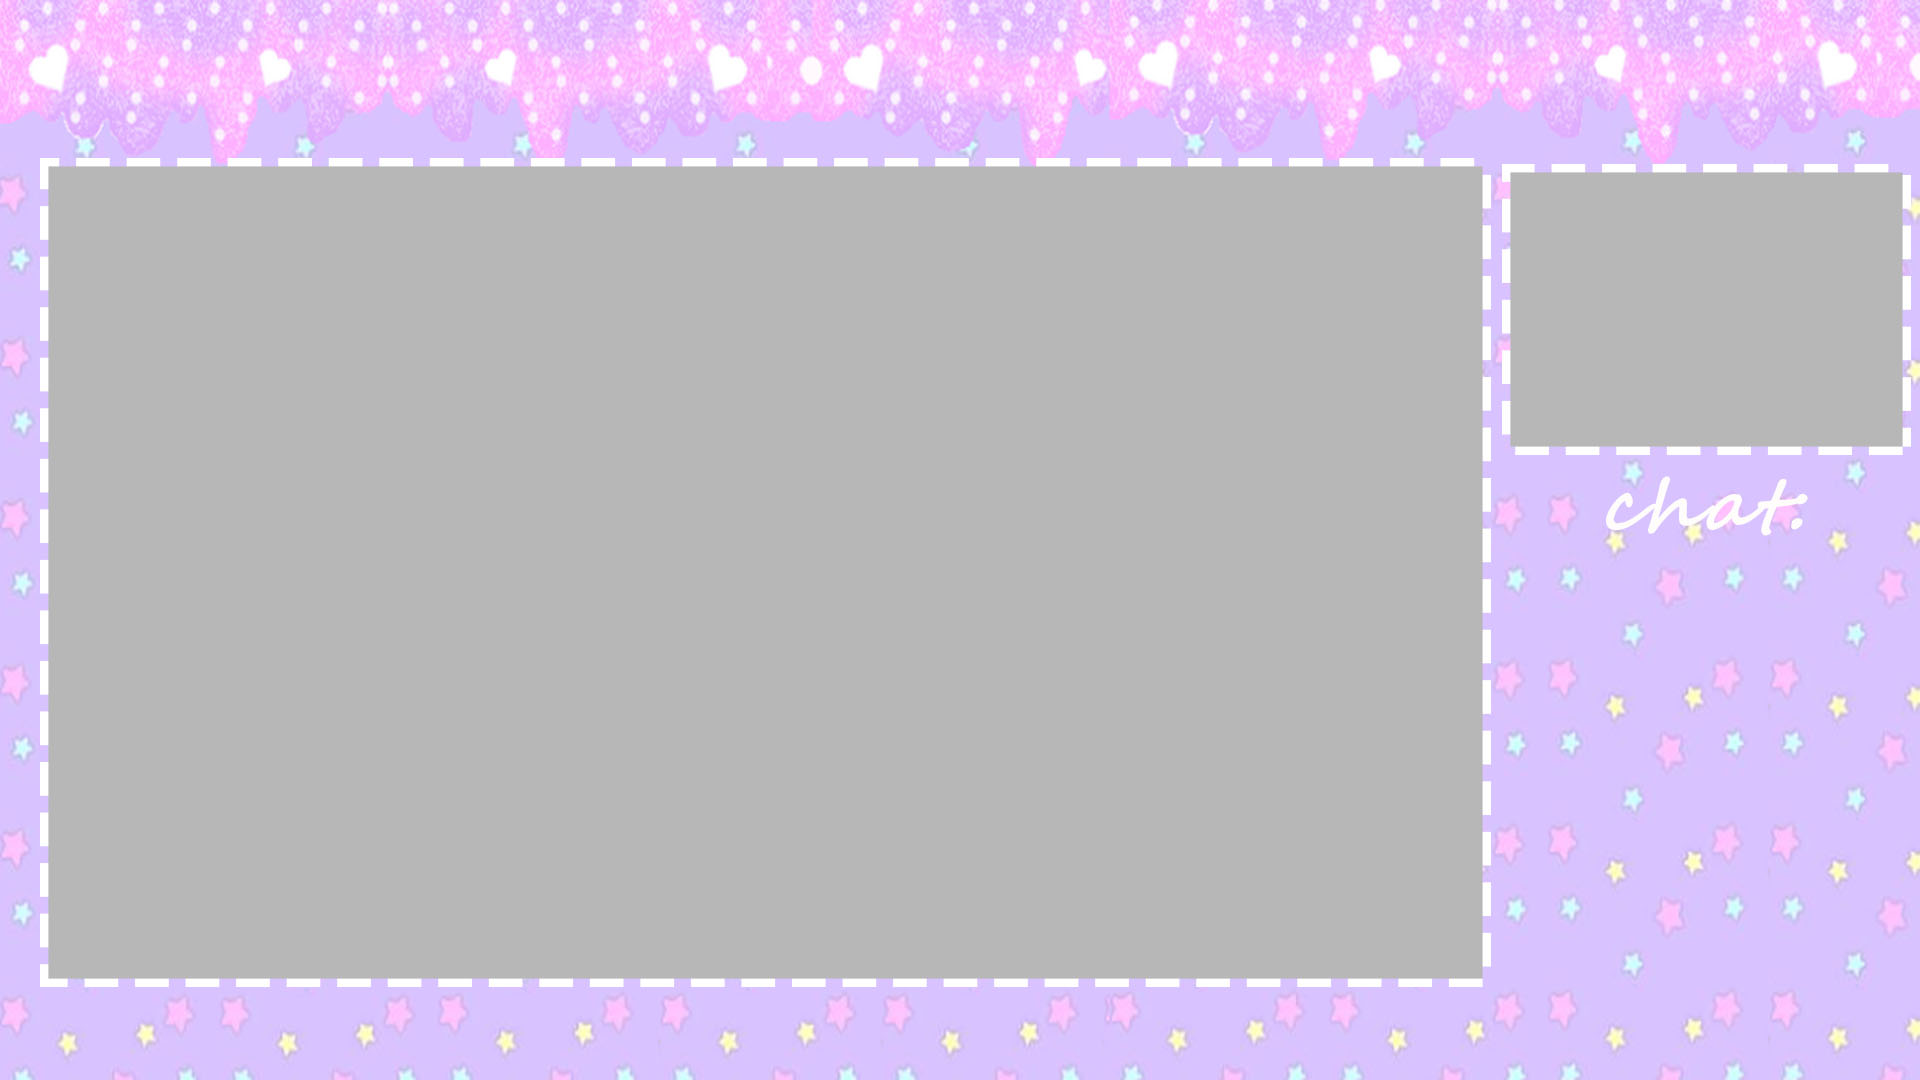 Twitch Overlay - Free to use / edit by weebiejeebies on DeviantArt